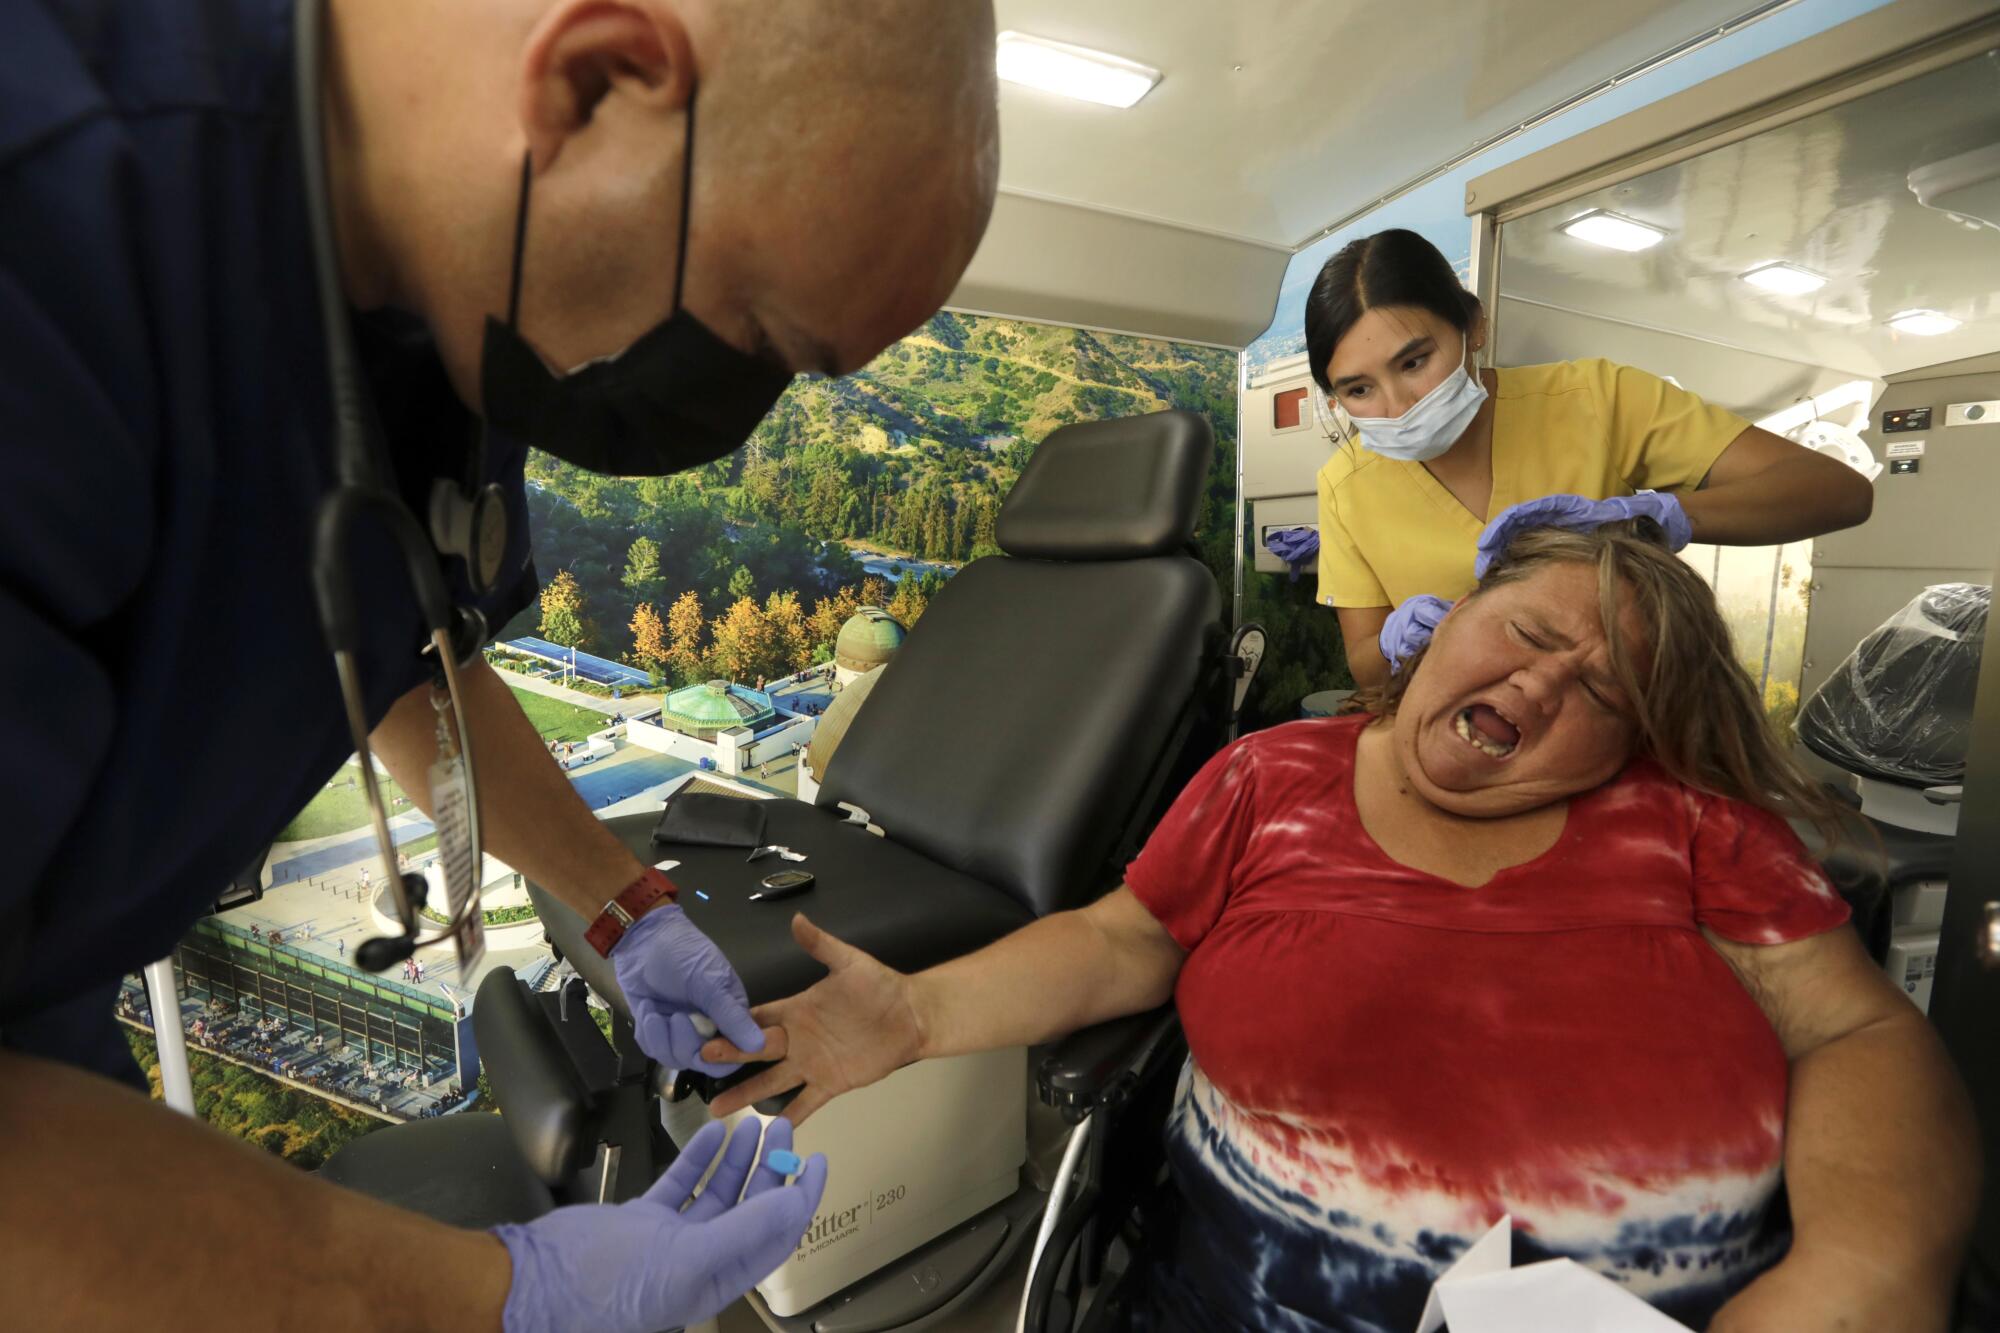 A woman grimaces as her finger is pricked for a blood sample while having her hair combed.